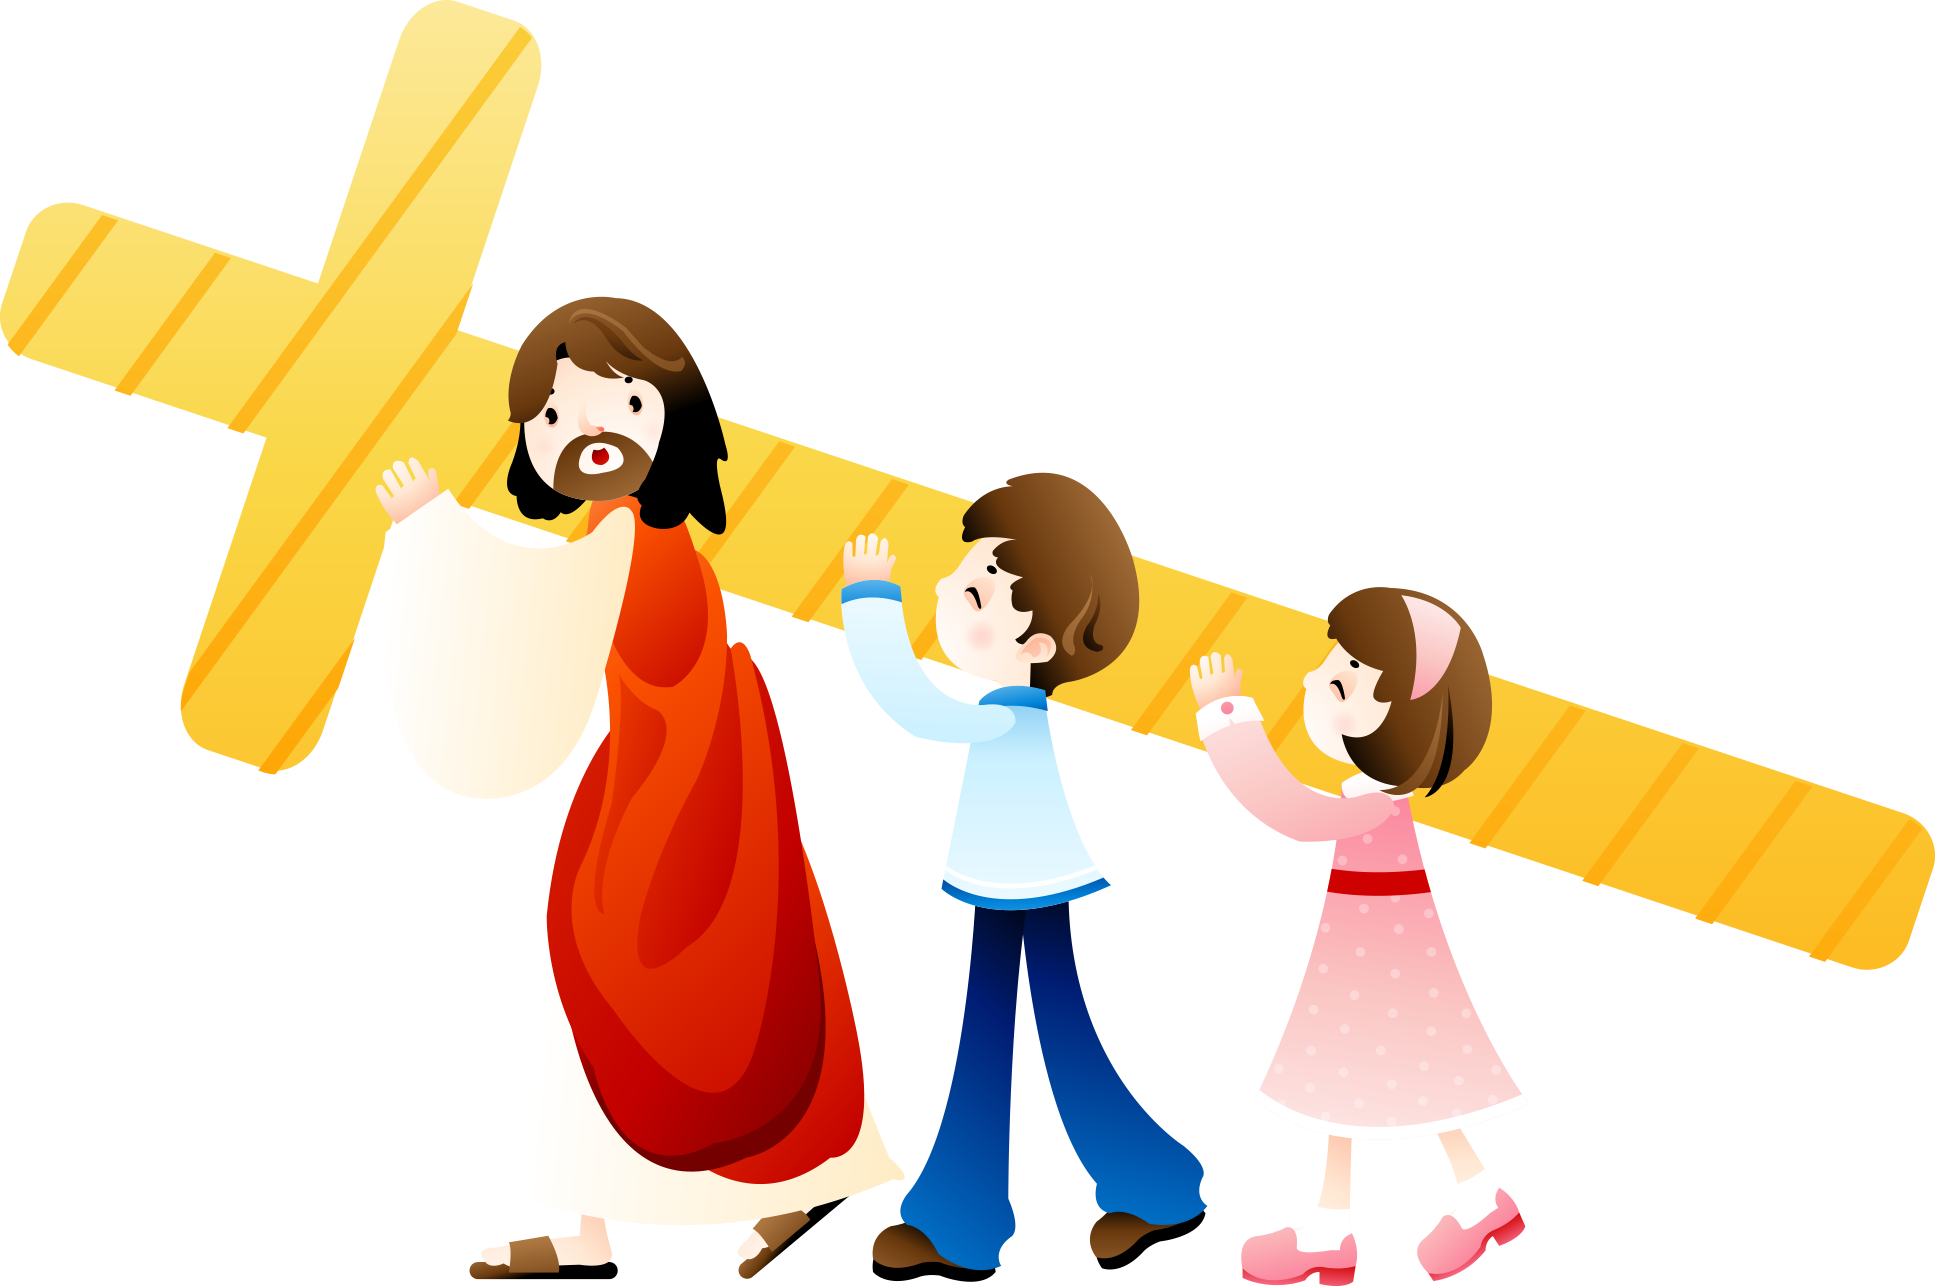 Bible Cross Jesus Holding Child Christianity PNG Image